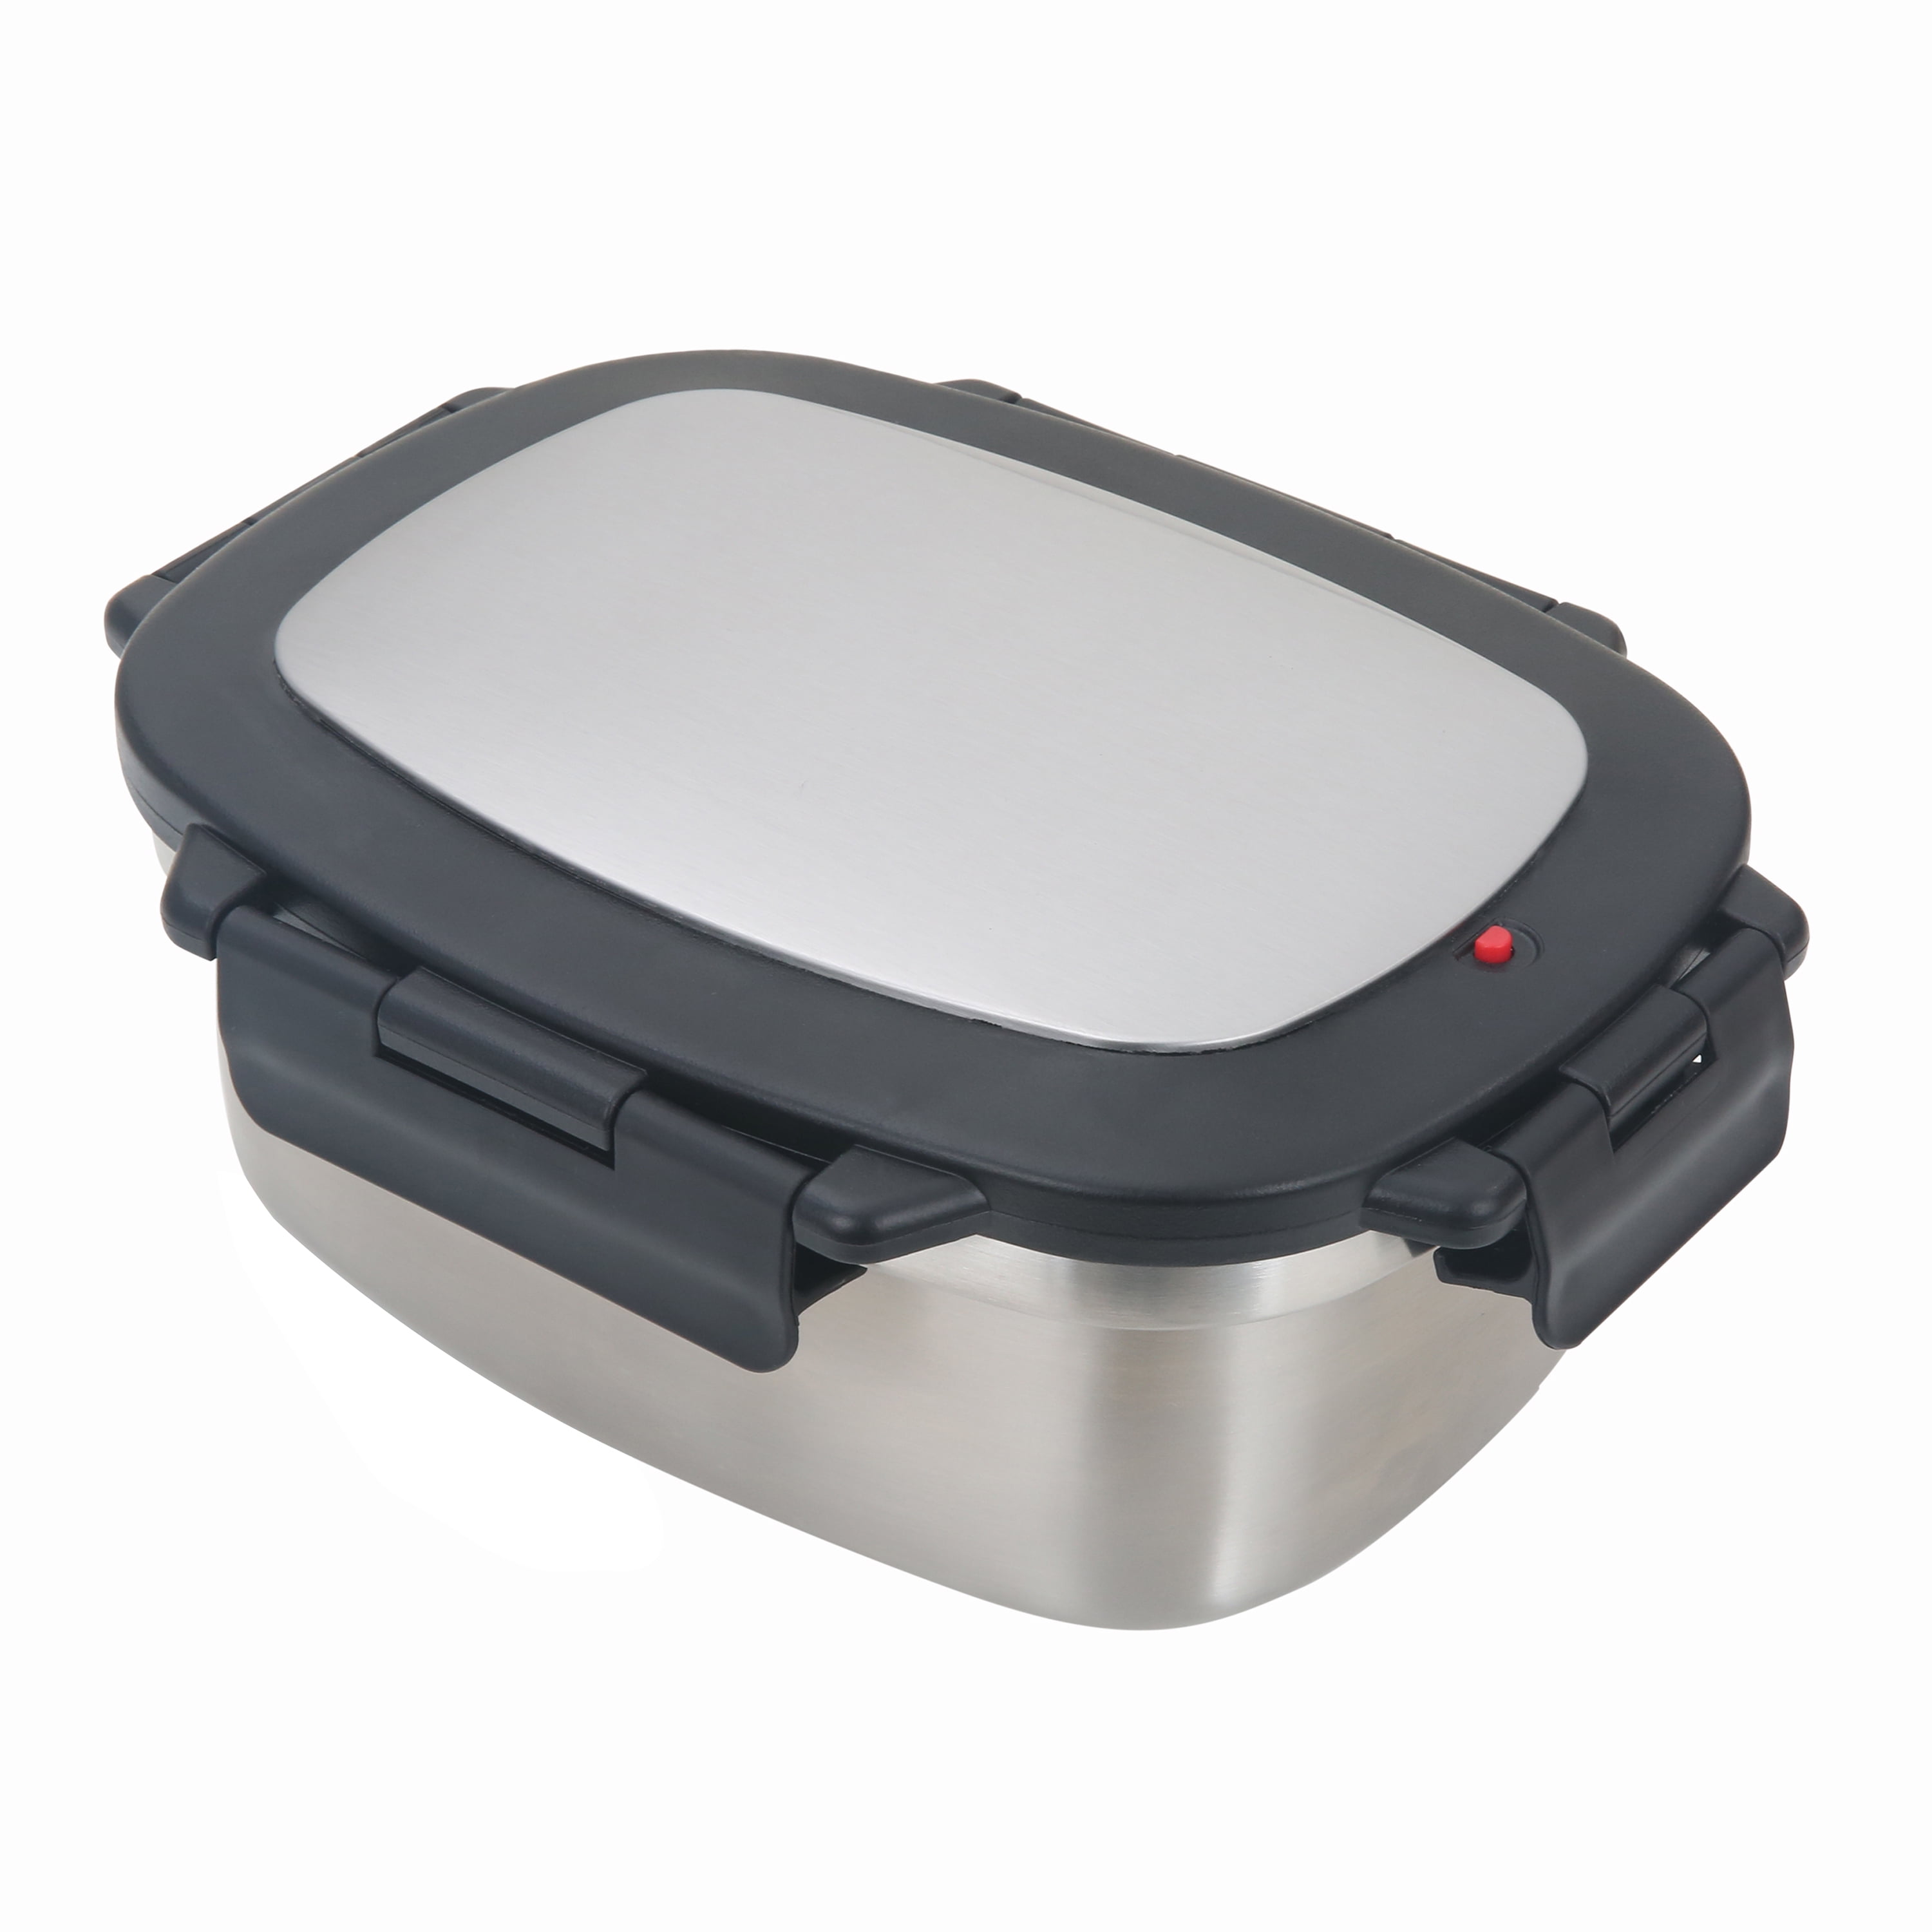 Mainstays Stainless Steel Insulated Food Container